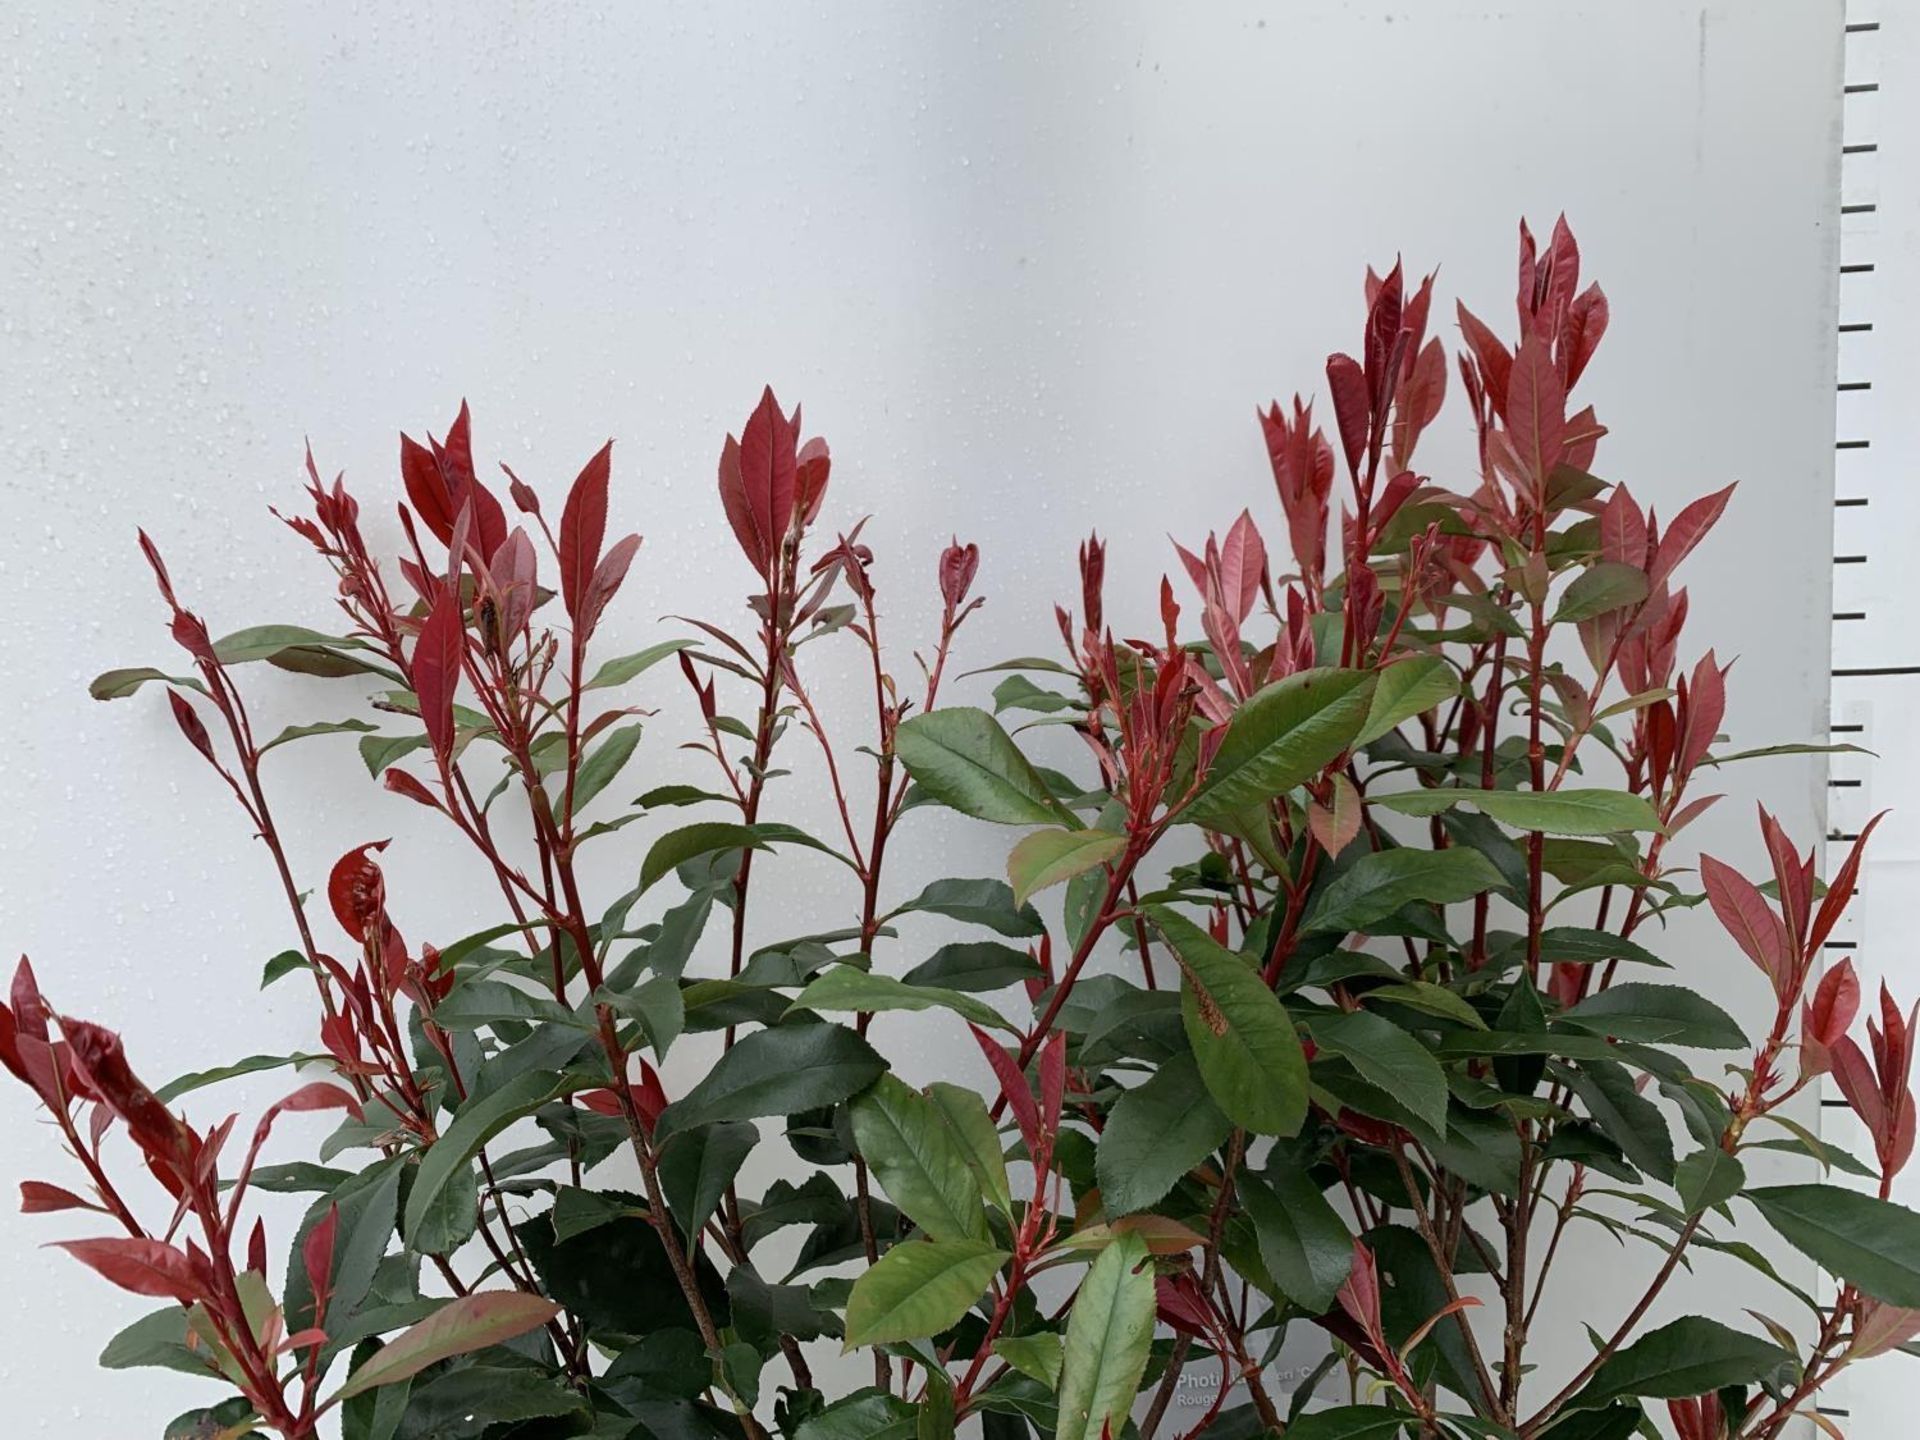 TWO PHOTINIA 'CARRE ROUGE' IN 3 LTR POTS APPROX 70CM IN HEIGHT PLUS VAT TO BE SOLD FOR THE TWO - Image 6 of 11